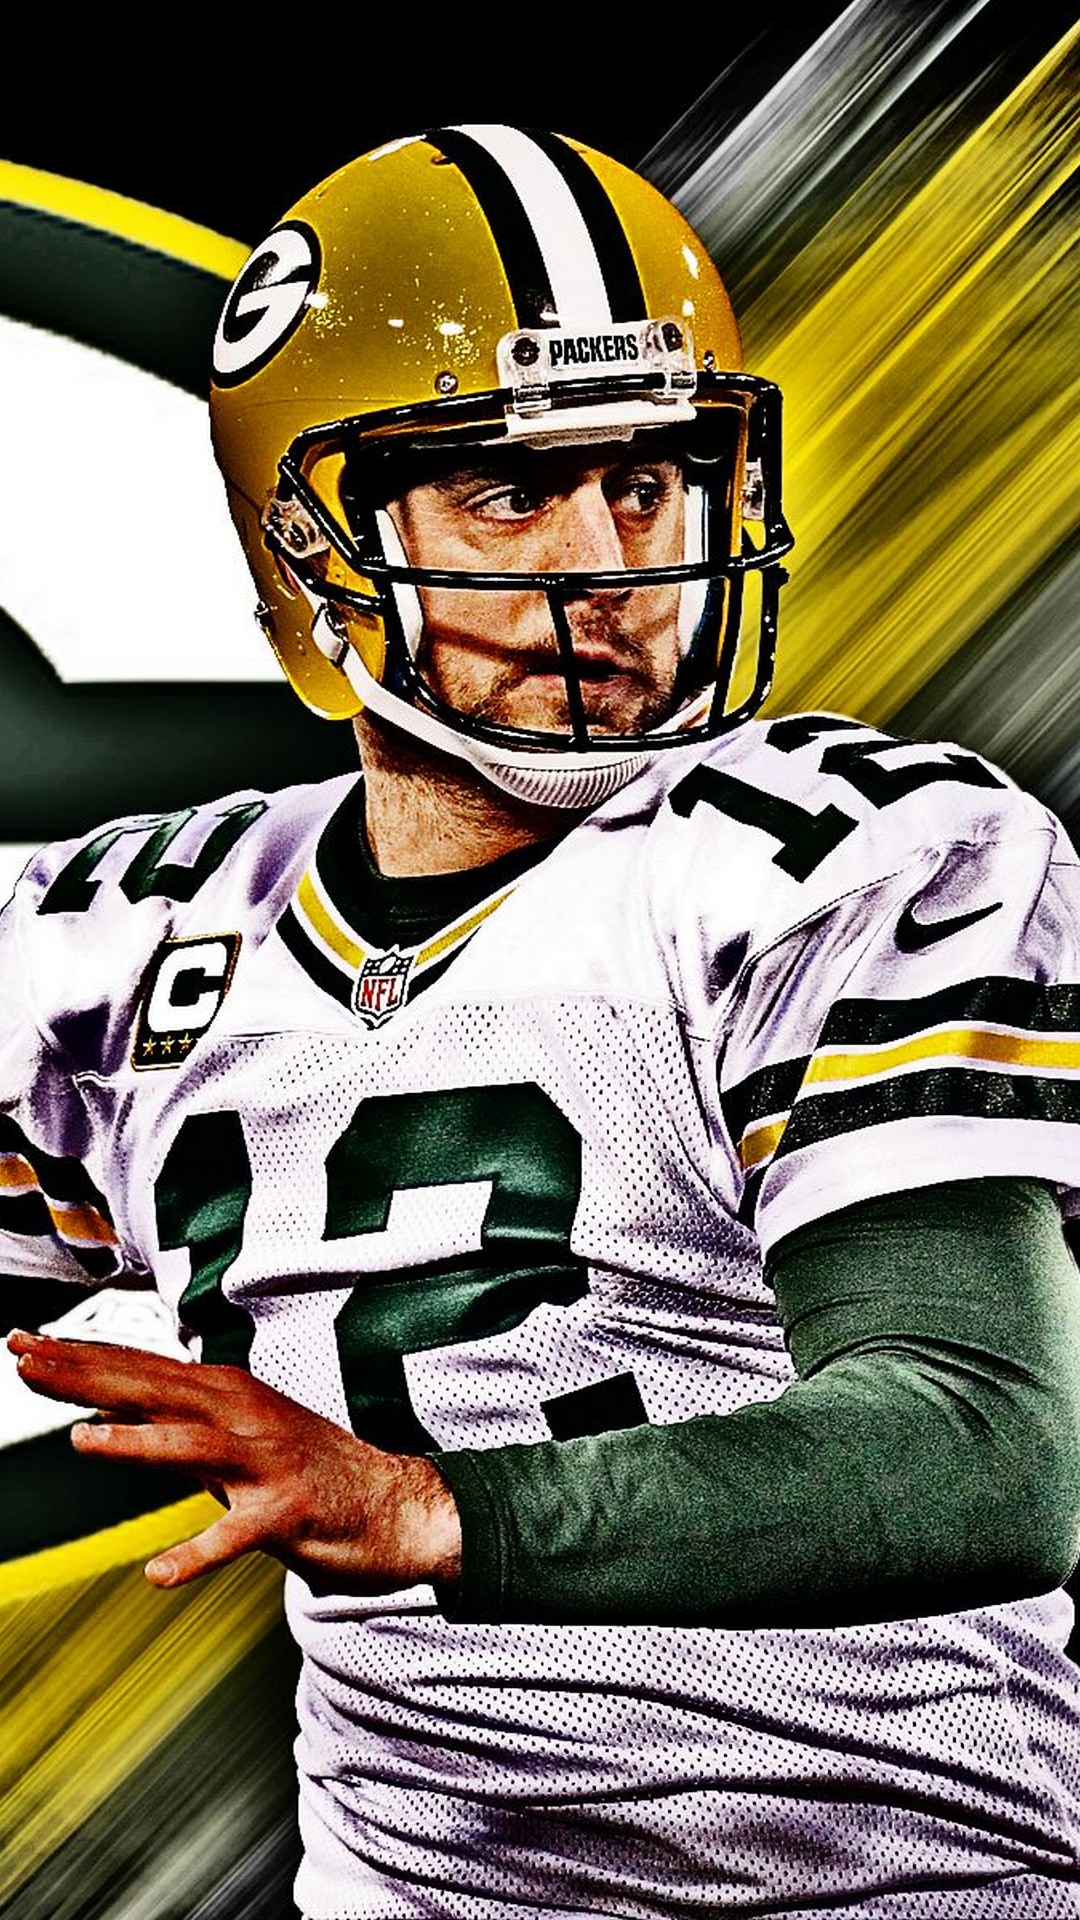 Aaron Rodgers iPhone 6 Wallpaper With high-resolution 1080X1920 pixel. Download and set as wallpaper for Apple iPhone X, XS Max, XR, 8, 7, 6, SE, iPad, Android